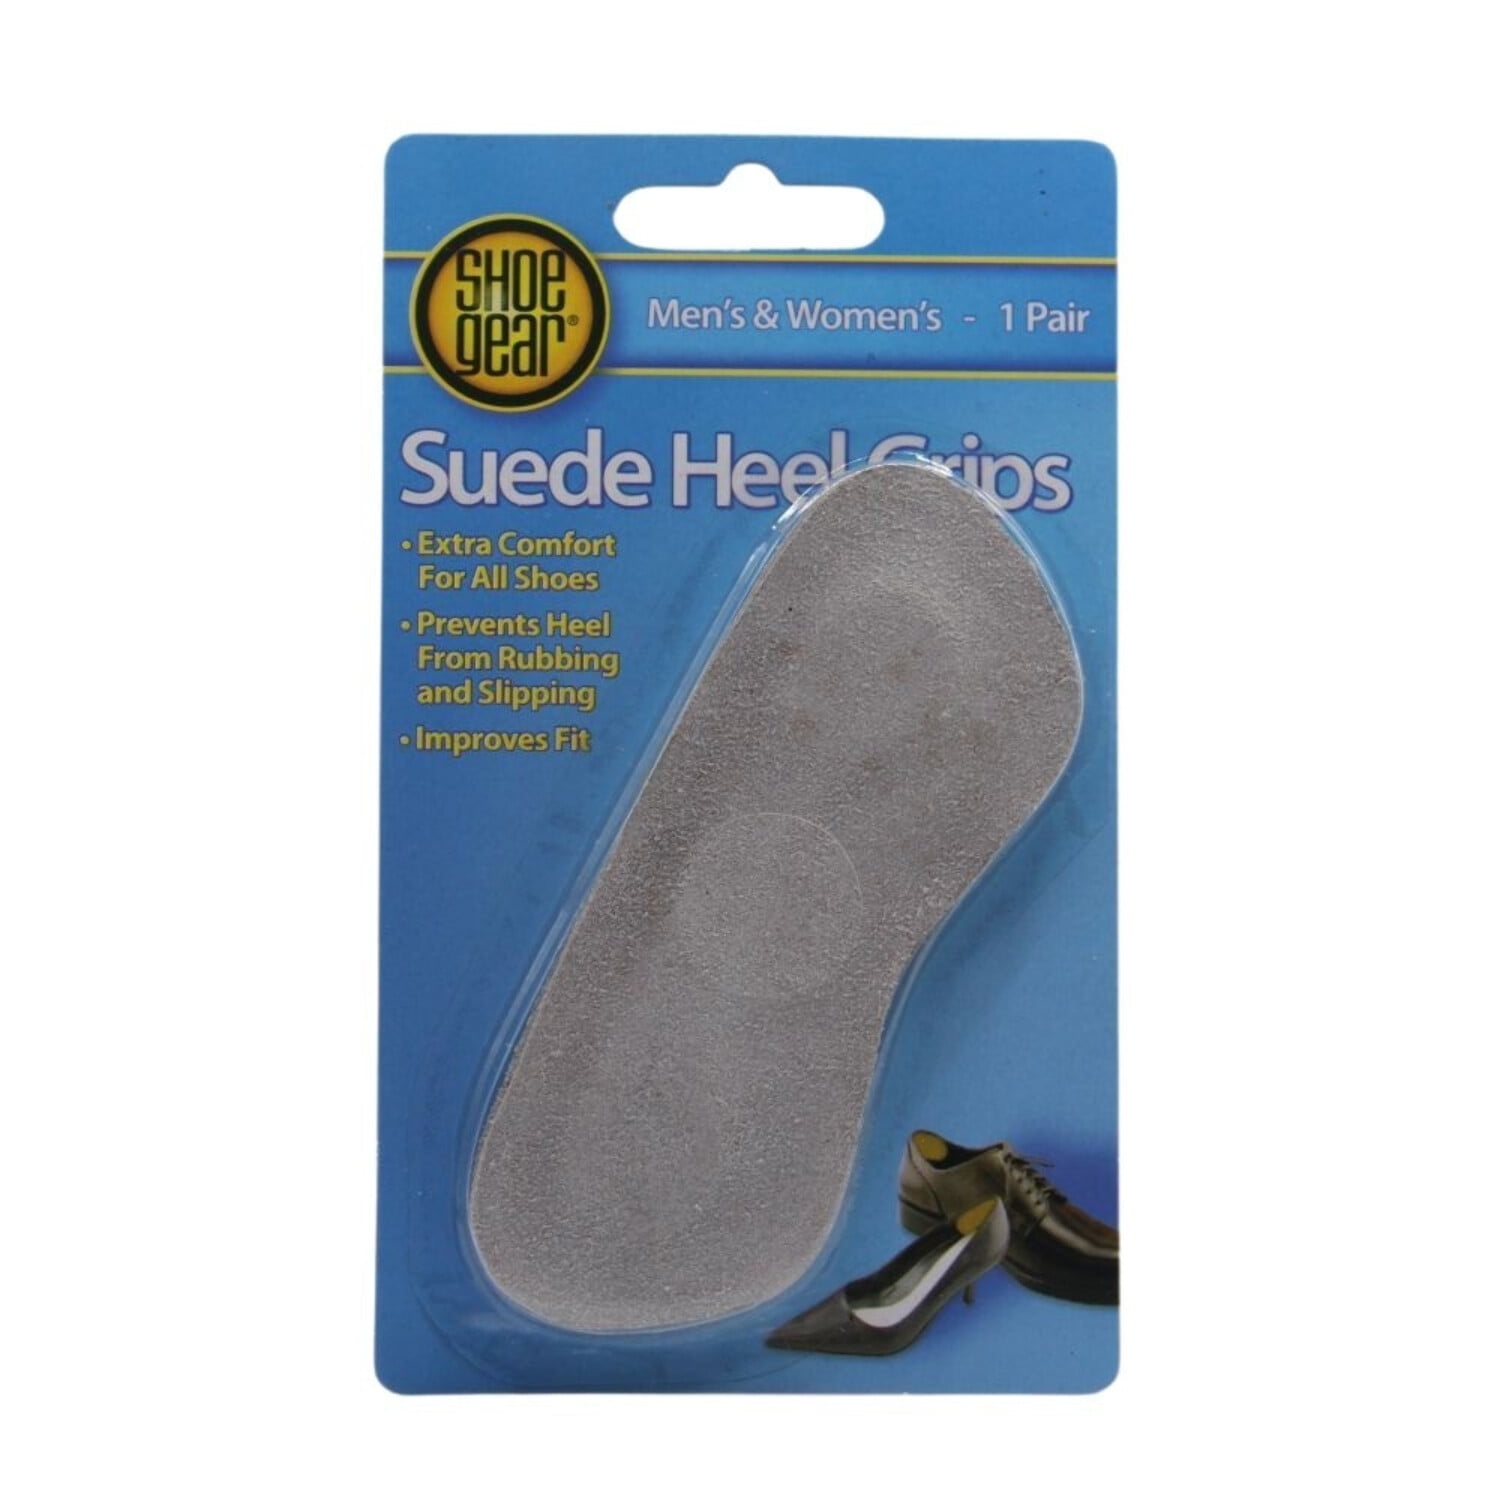 Heel Stickers Heel Cushion Pads Shoe Heel Insoles for Improved Shoe Fit and  Comfort(2 Pair,4 Pieces) - Walmart.com